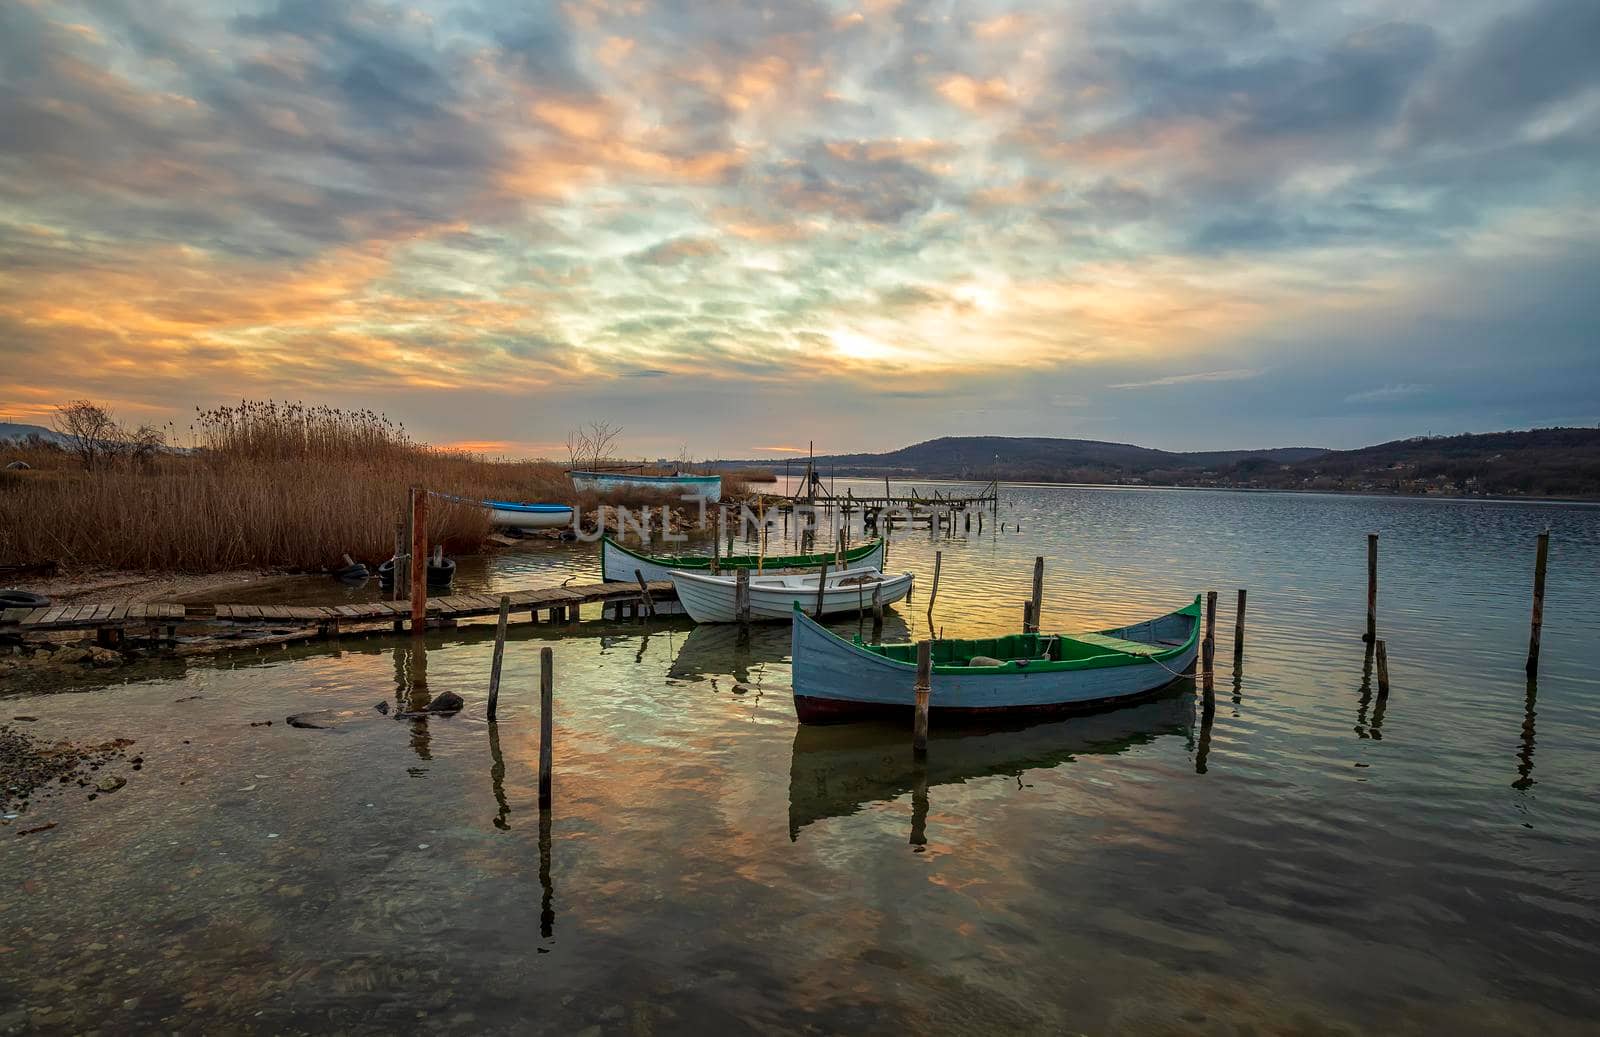 The tranquil afternoon on a lake with a wooden pier and boats at colorful sky.